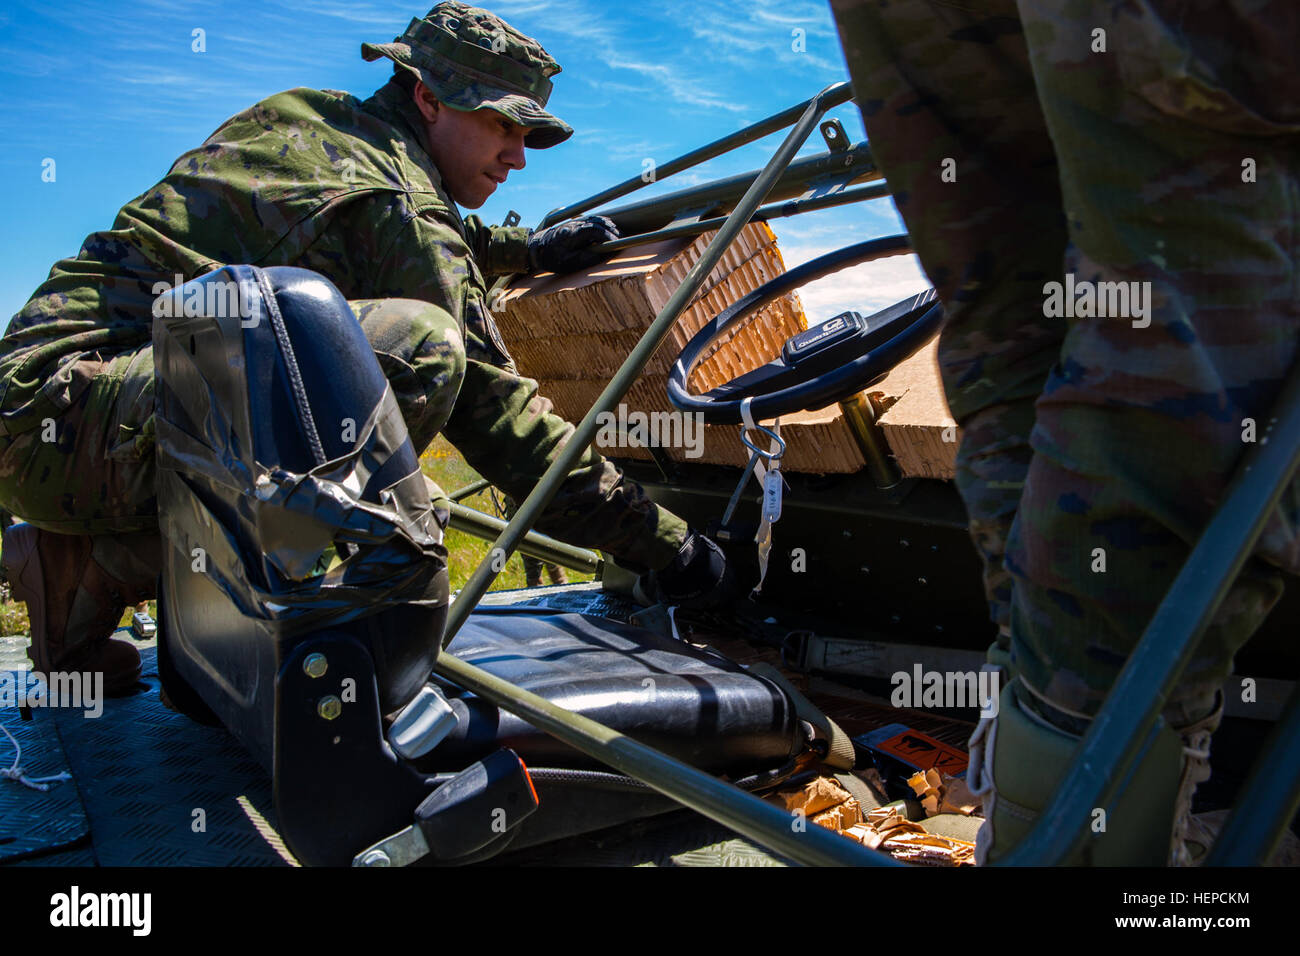 Spanish Soldiers from the Brigada Paracaidista recover a transport vehicle following an airborne cargo drop during Operation Skyfall - España, Madrid, Spain, May 7, 2015.  Operation Skyfall - España is an exercise initiated and organized by the 982nd Combat Camera Company, and hosted by the Brigada Paracaidista of the Spanish army. The exercise is a bilateral subject matter exchange focusing on interoperability of combat camera training and documentation of airborne operations. (U.S. Army photo by Staff Sgt. Justin P. Morelli / Released) Operation Skyfall - Espa%%%%%%%%C3%%%%%%%%B1a 150507-A-P Stock Photo